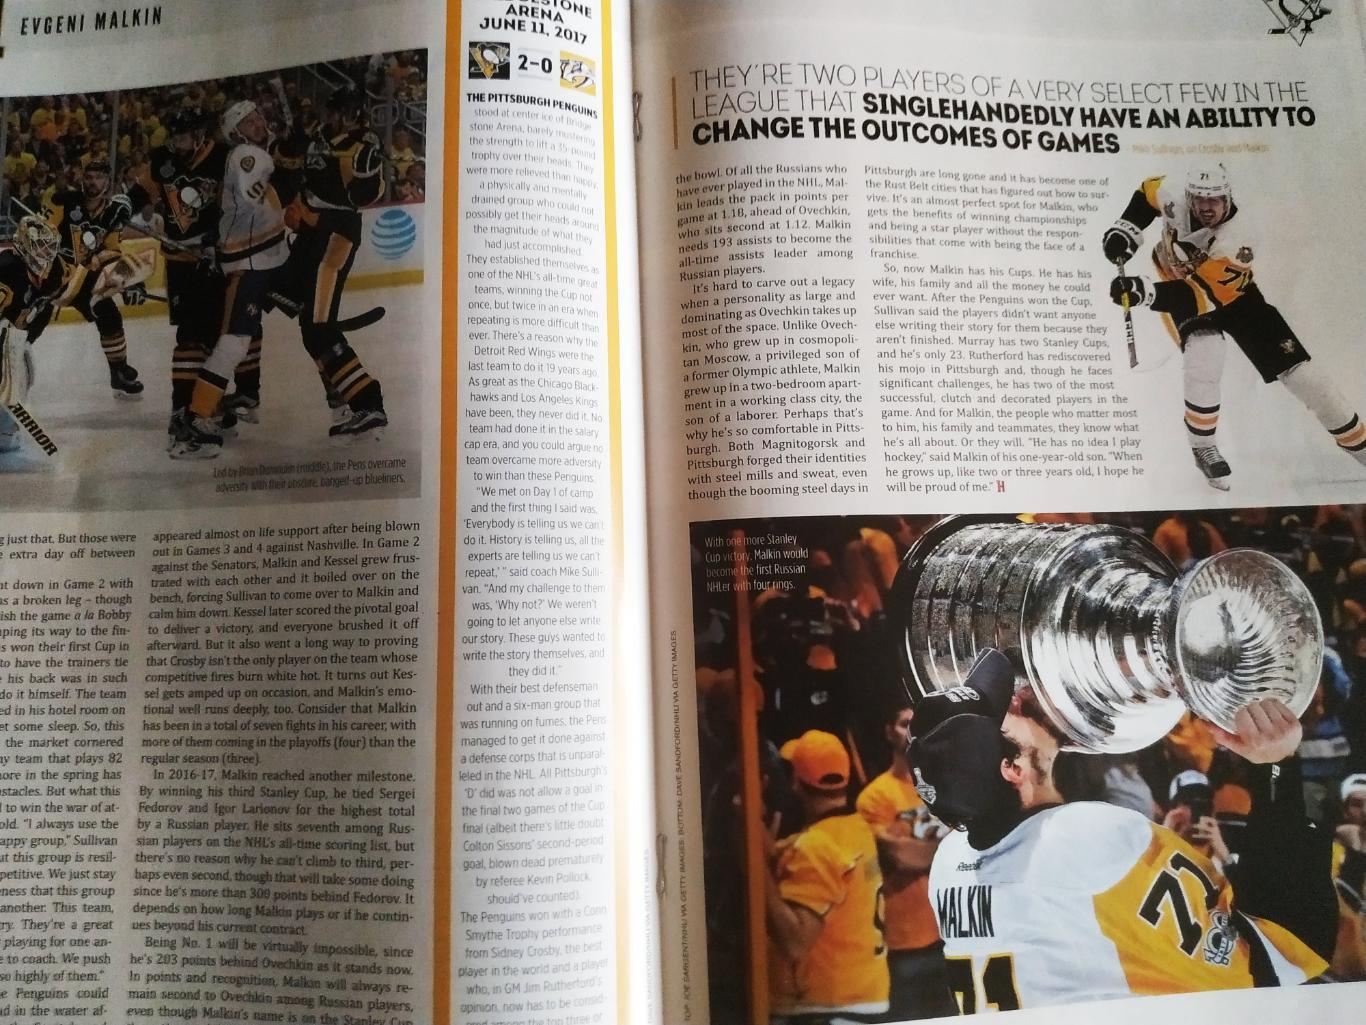 ЖУРНАЛ 2017 AUG 21 THE HOCKEY NEWS STANLEY CUP CHAMPIONS HISTORY IS MADE 5